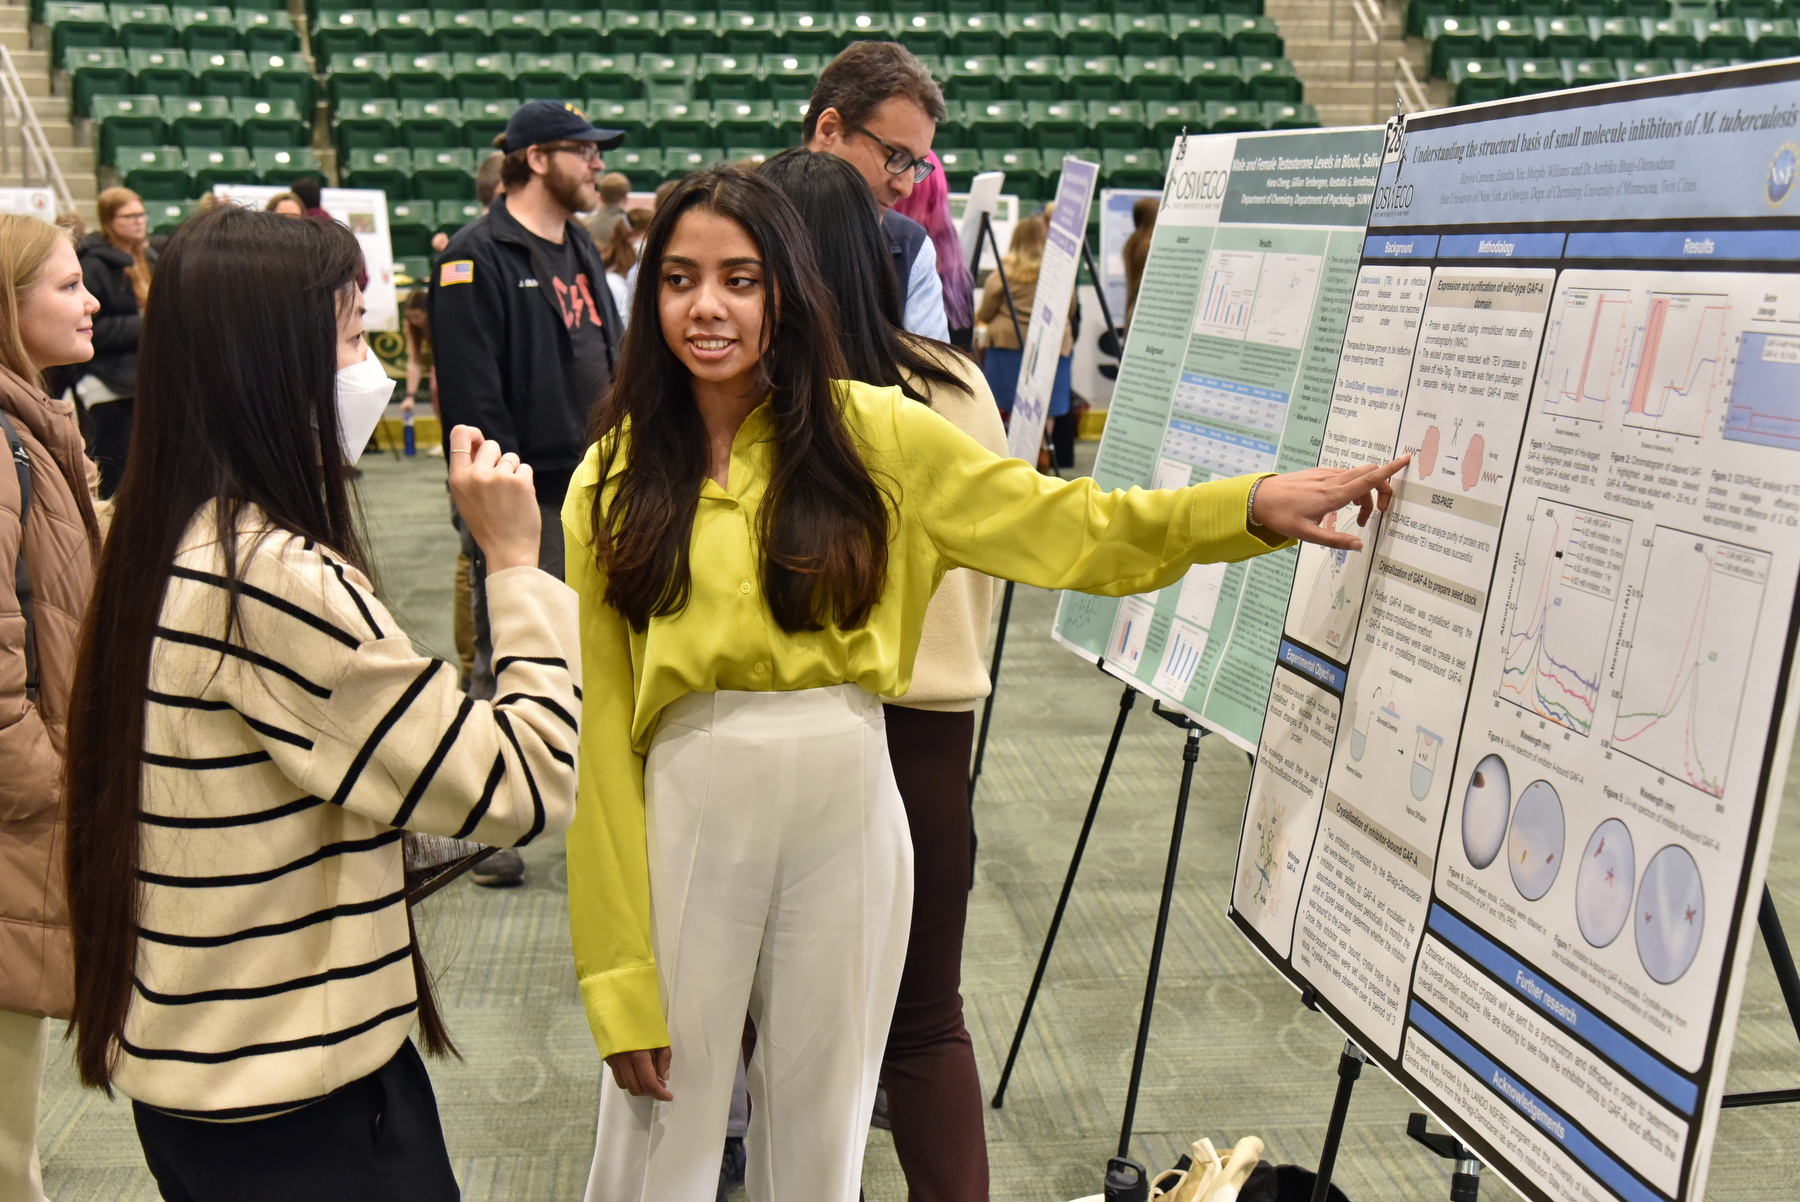 Biochemistry major Fathima Raviya Careem talks about her research into understanding the structural basis of small molecule inhibitors that bind to the GAF-A domain on the DosS/DosR regulatory system, responsible for tuberculosis dormancy, during this year’s Quest on April 19.